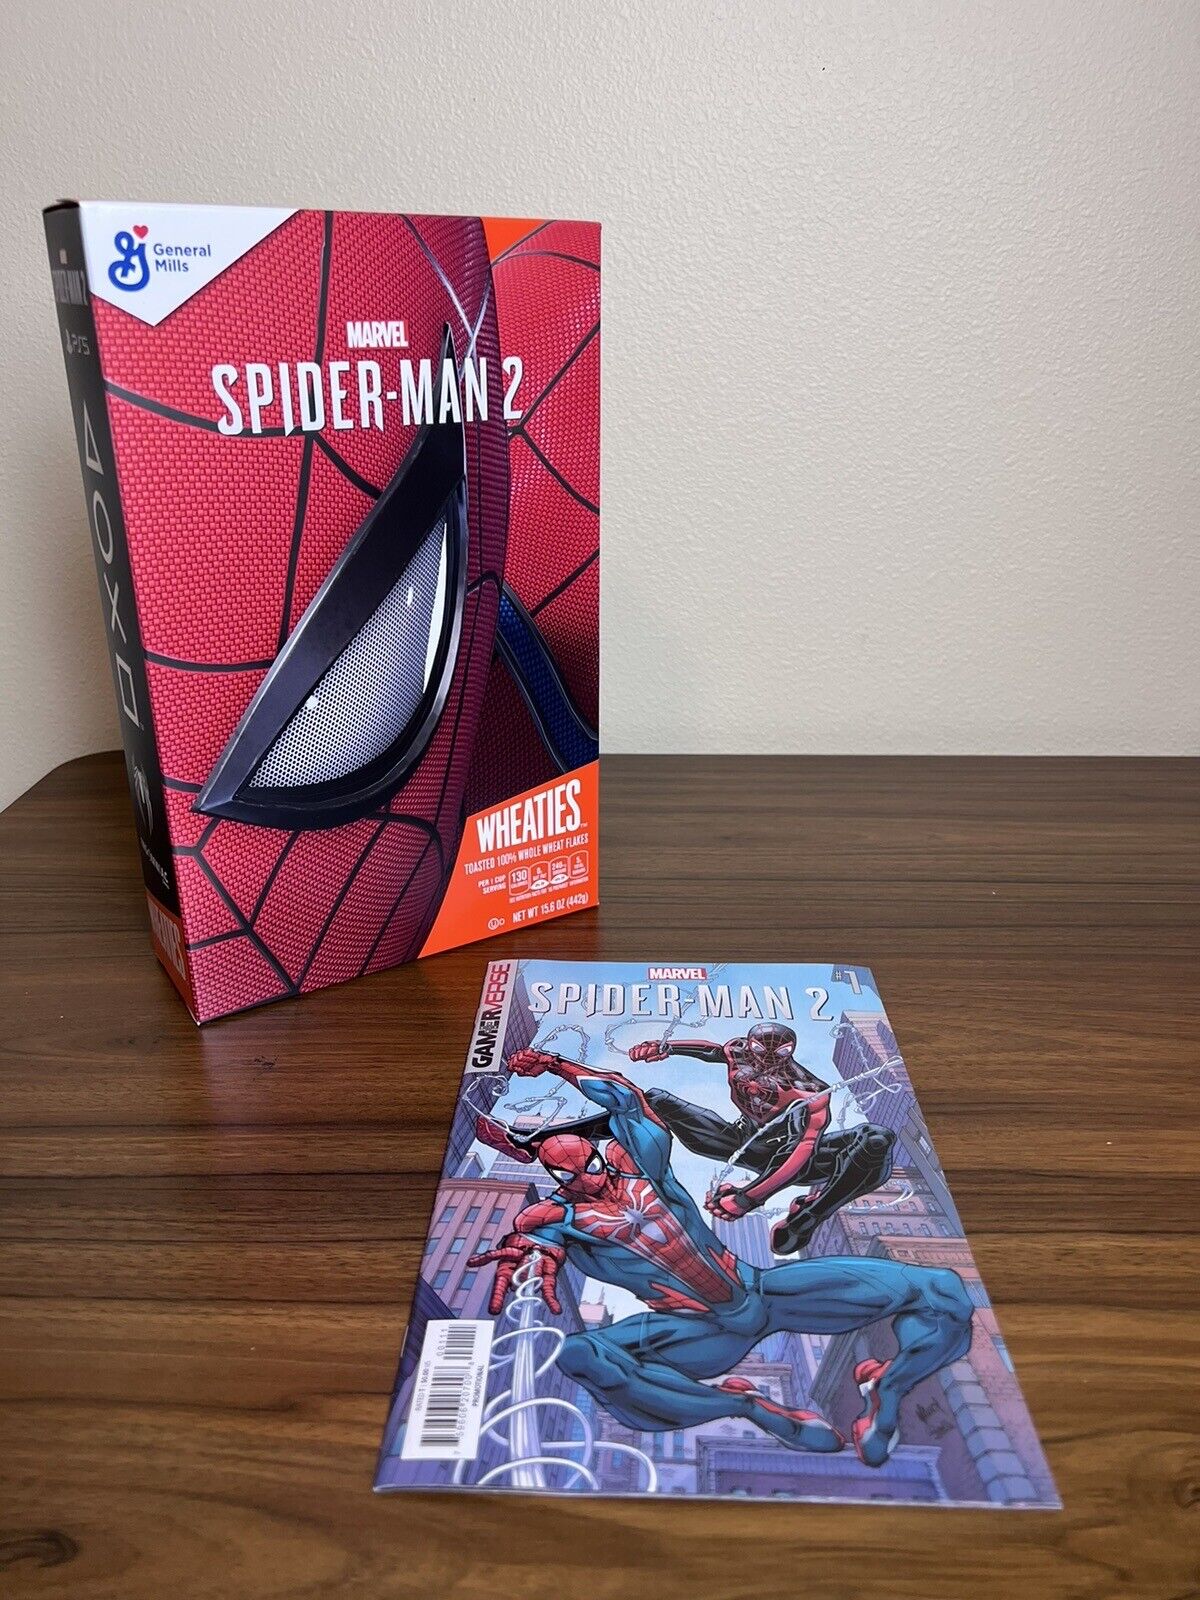 Wheaties Marvel’s Spider-Man 2 Box Limited Edition /2000 w/ Comic & Code